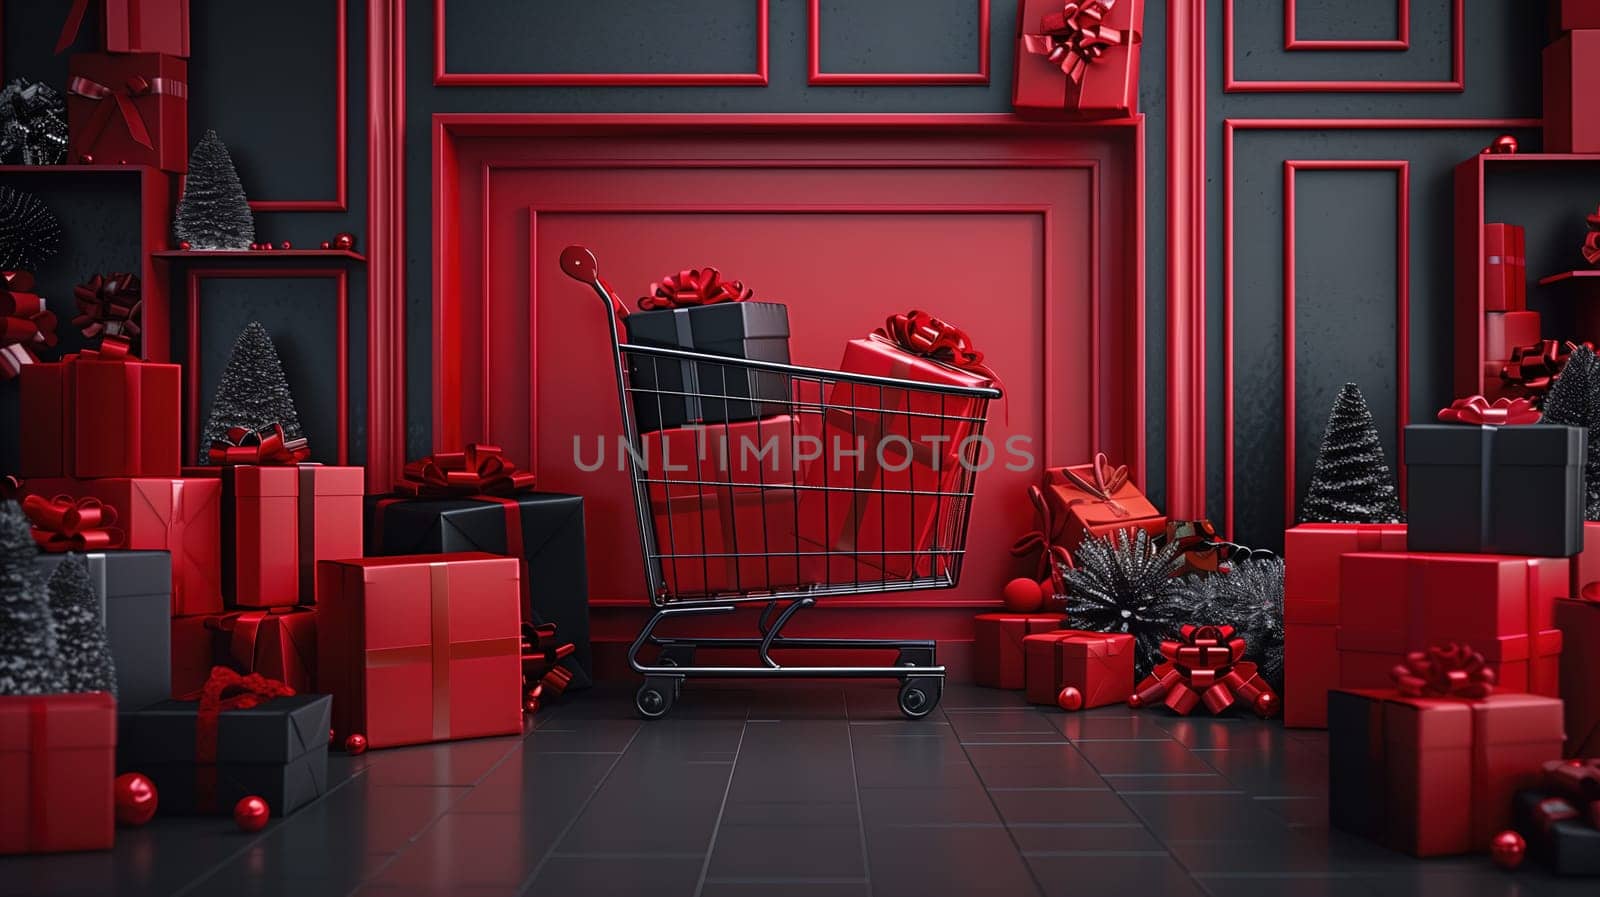 A shopping cart filled with Christmas presents, symbolizing the holiday season and the concept of sales such as Black Friday. The presents are various sizes and wrapped in festive paper, creating a cheerful and festive scene.